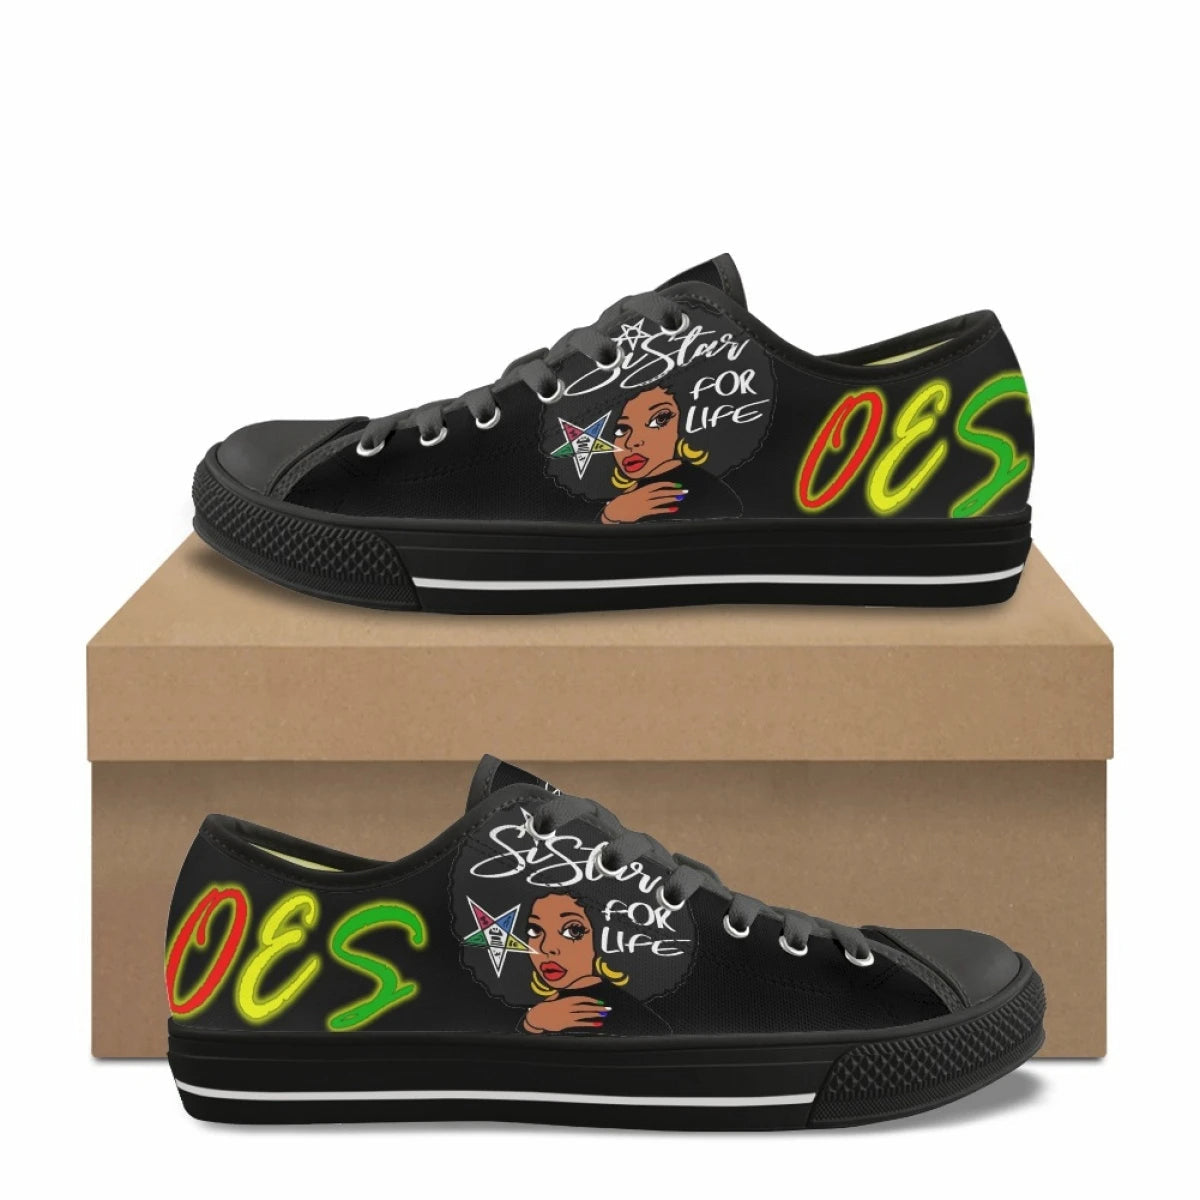 OES Sneakers -  Printed Design With Lace Up Closure - Bricks Masons